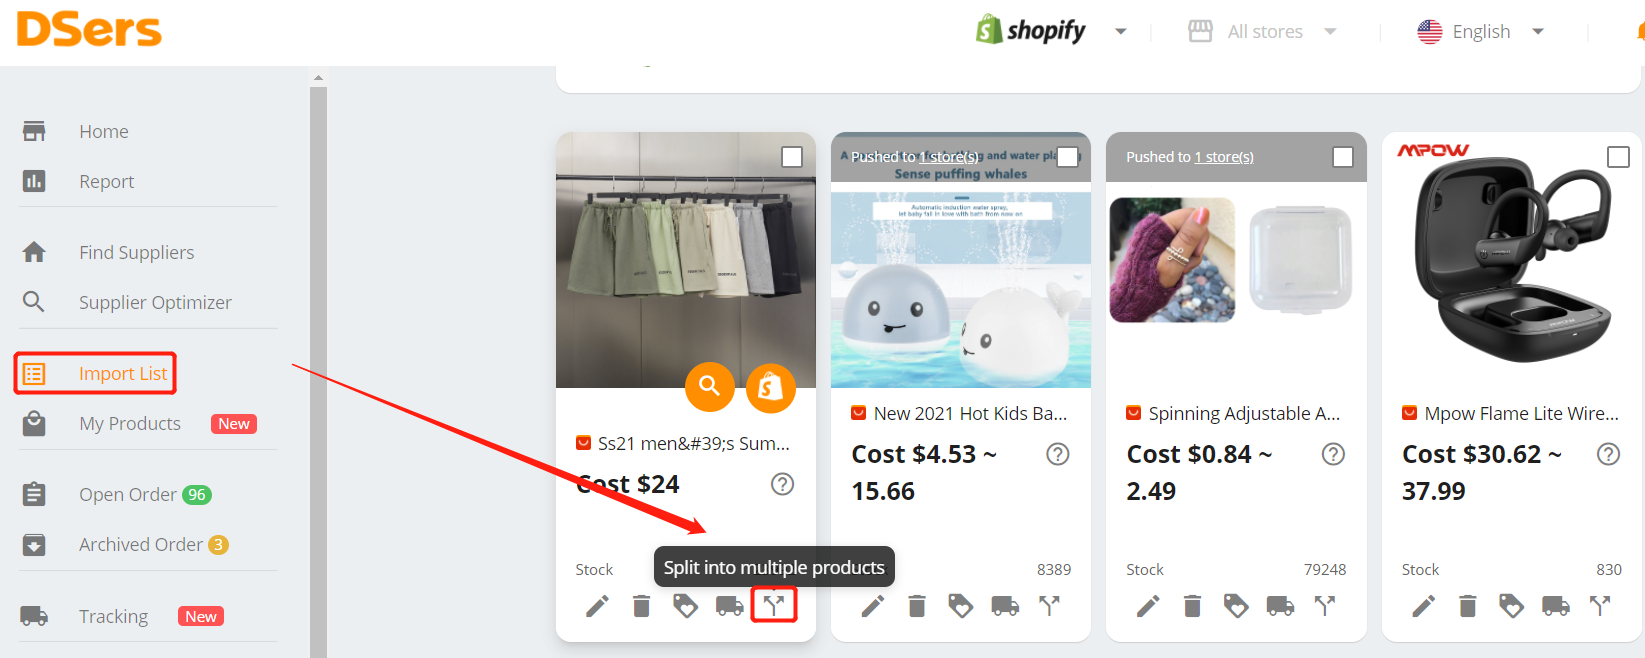 Split a product - Split into multiple products- Shopify DSers